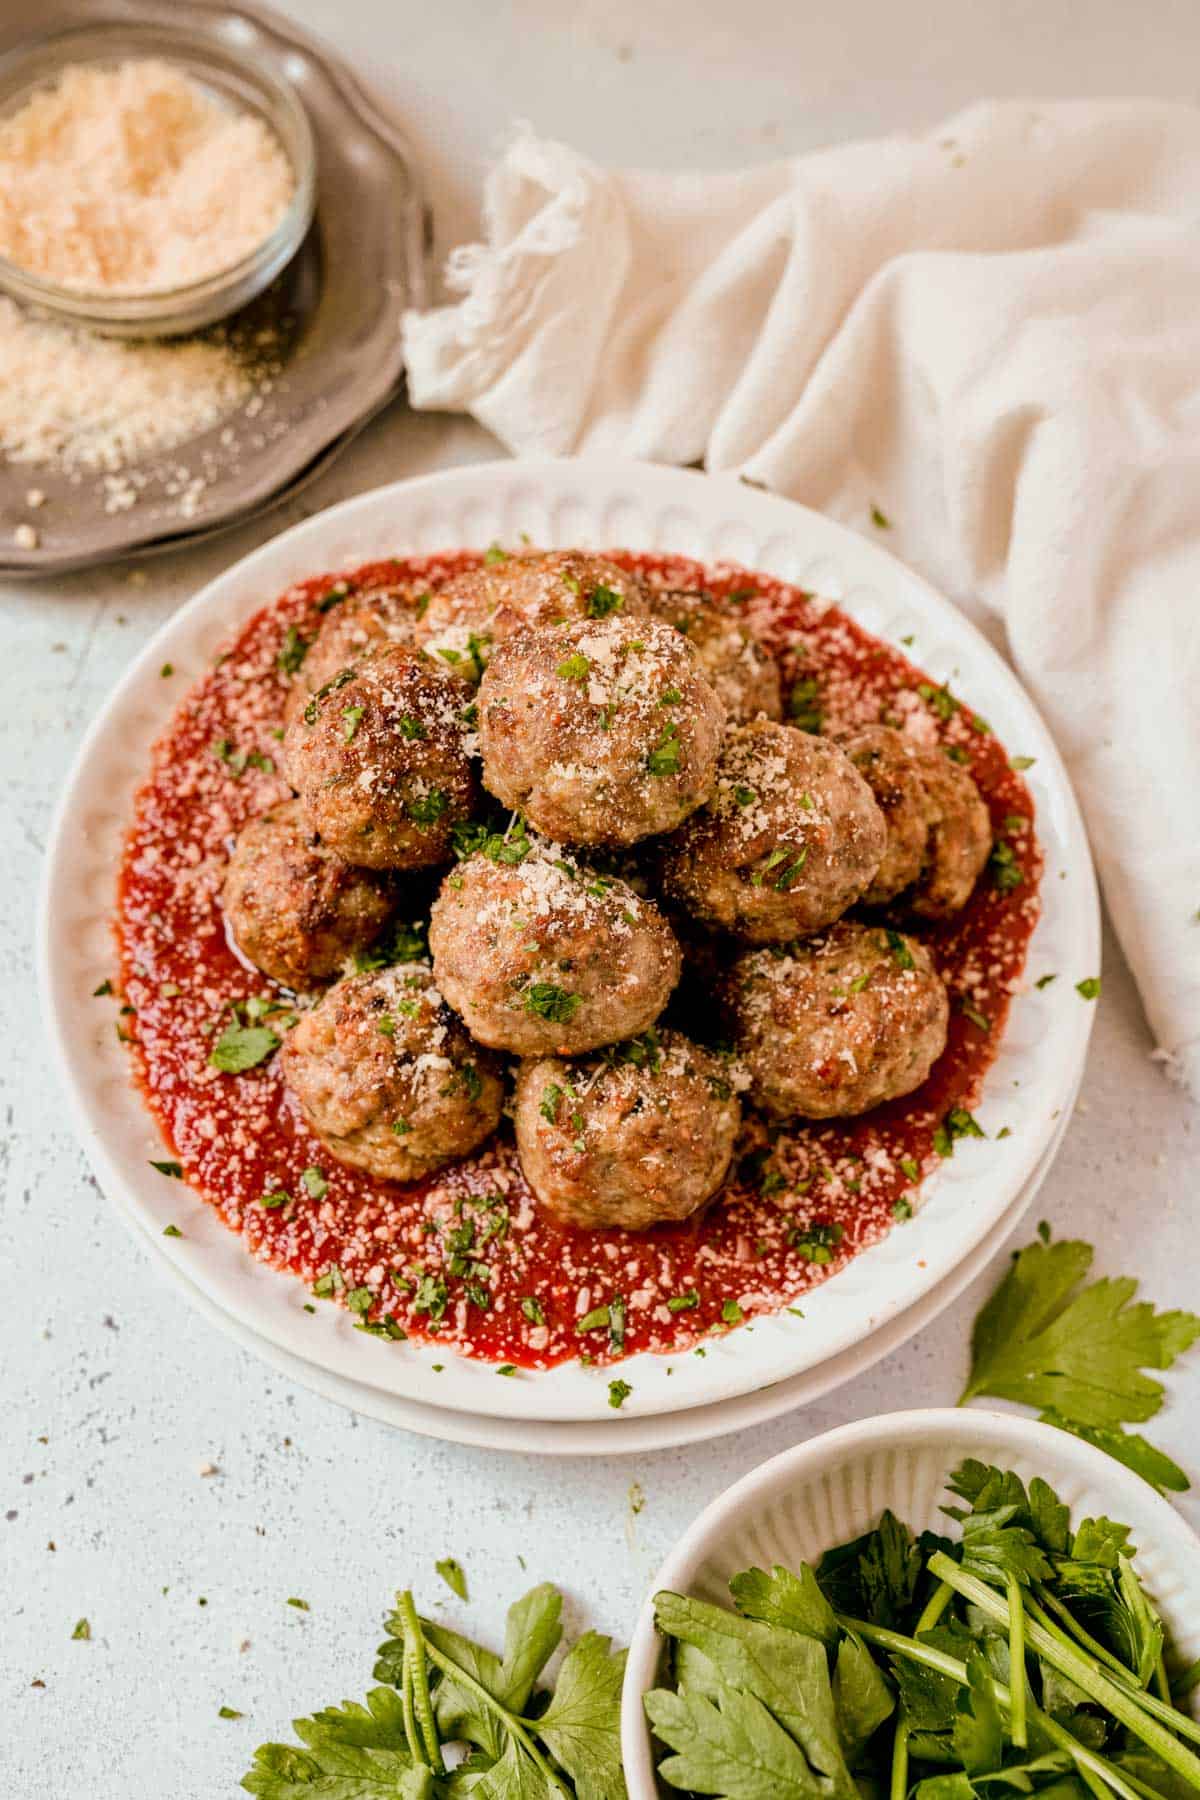 a plate of baked meatballs with parsley and parmesan cheese